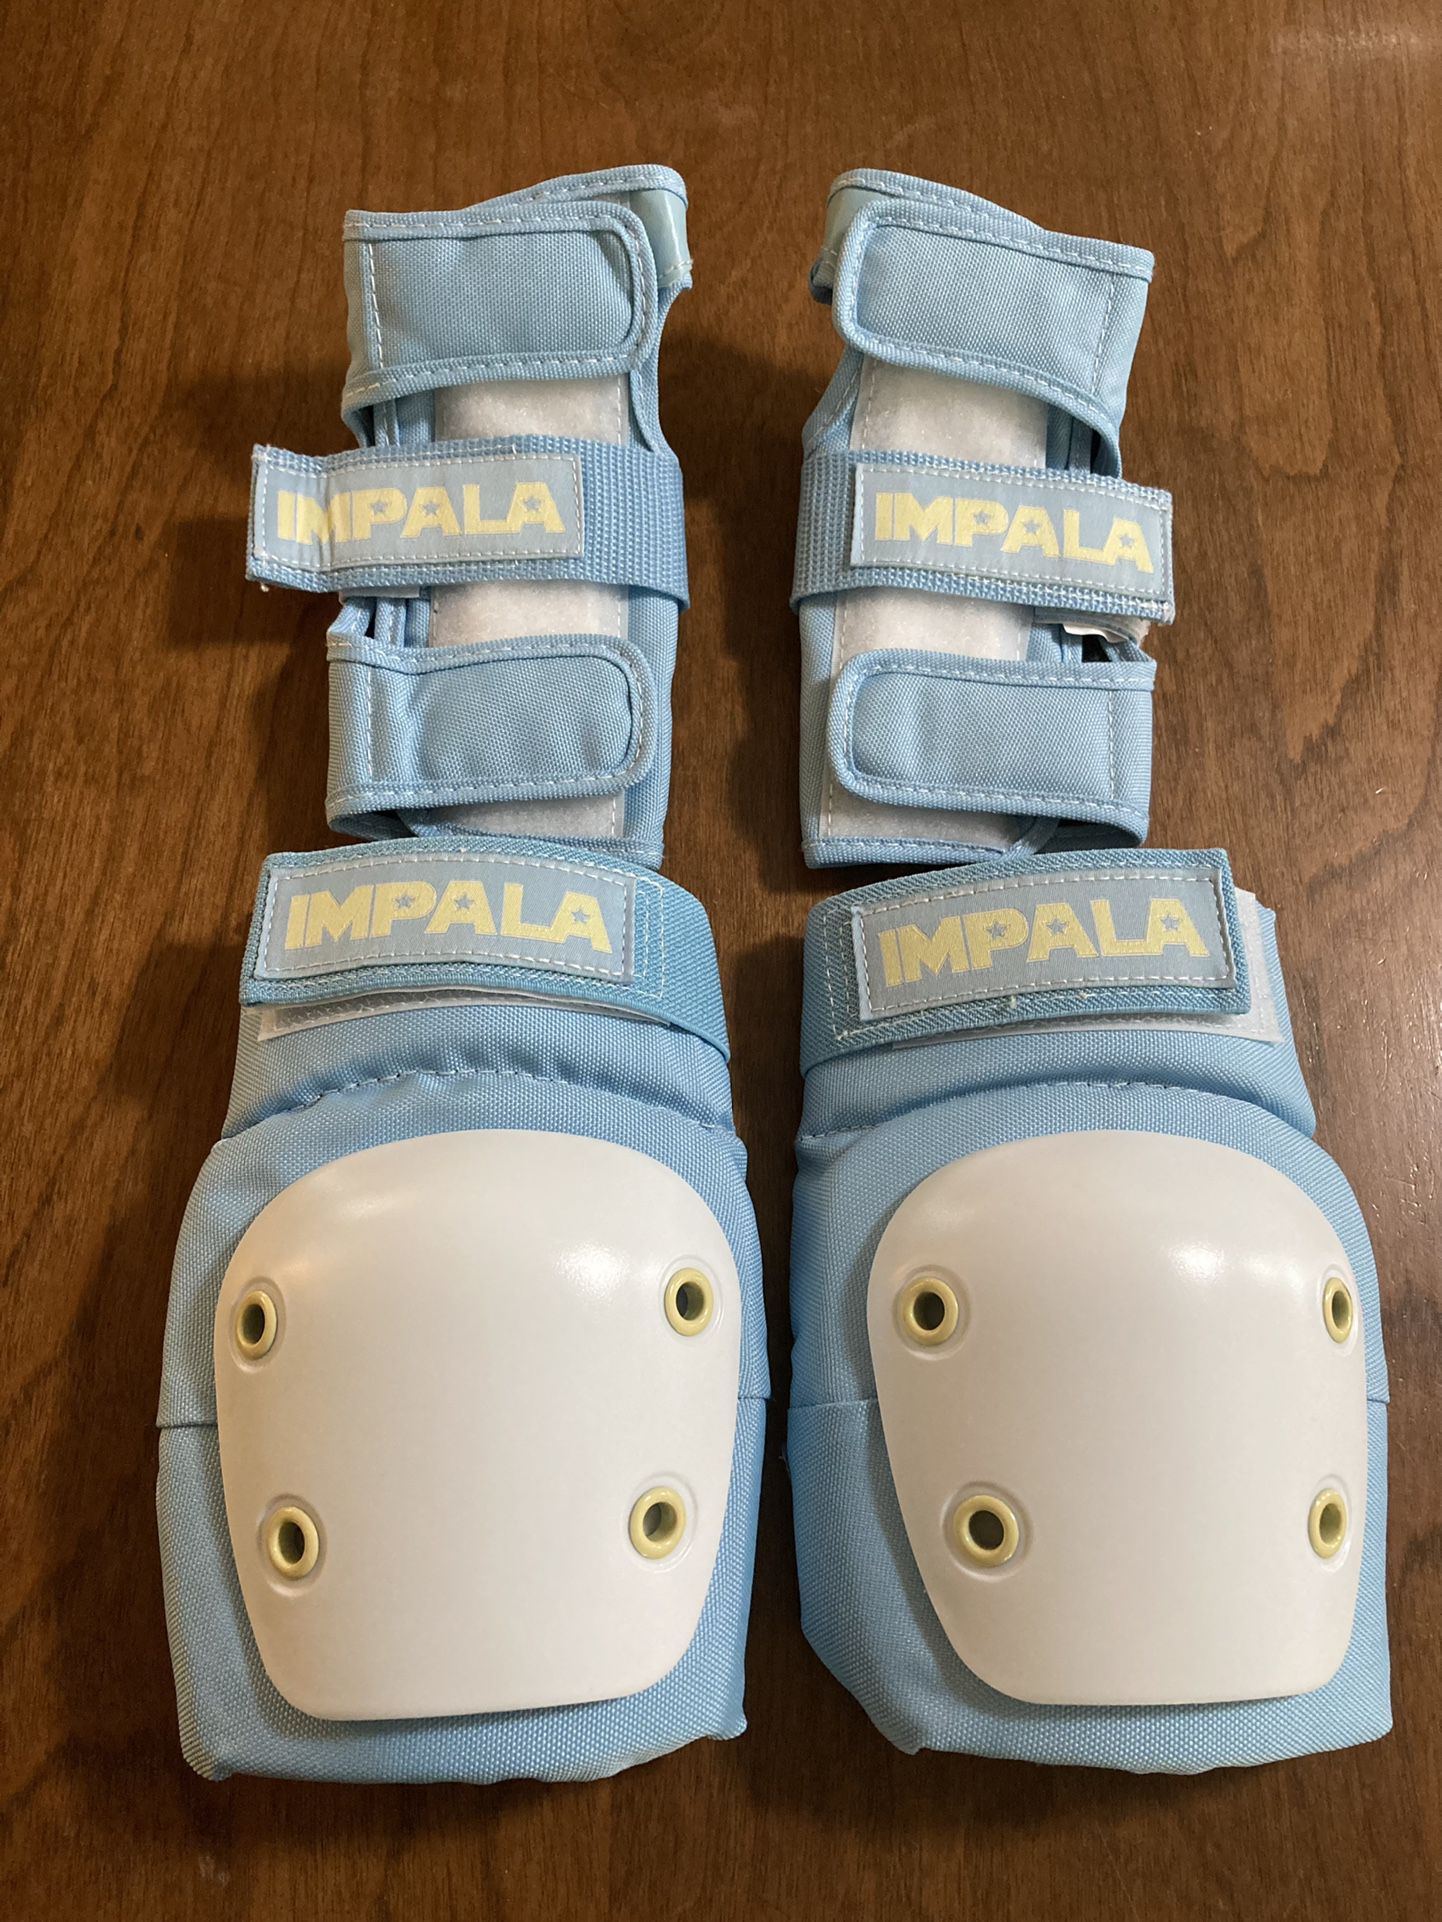 Impala Wrist Guards And Elbow Pads